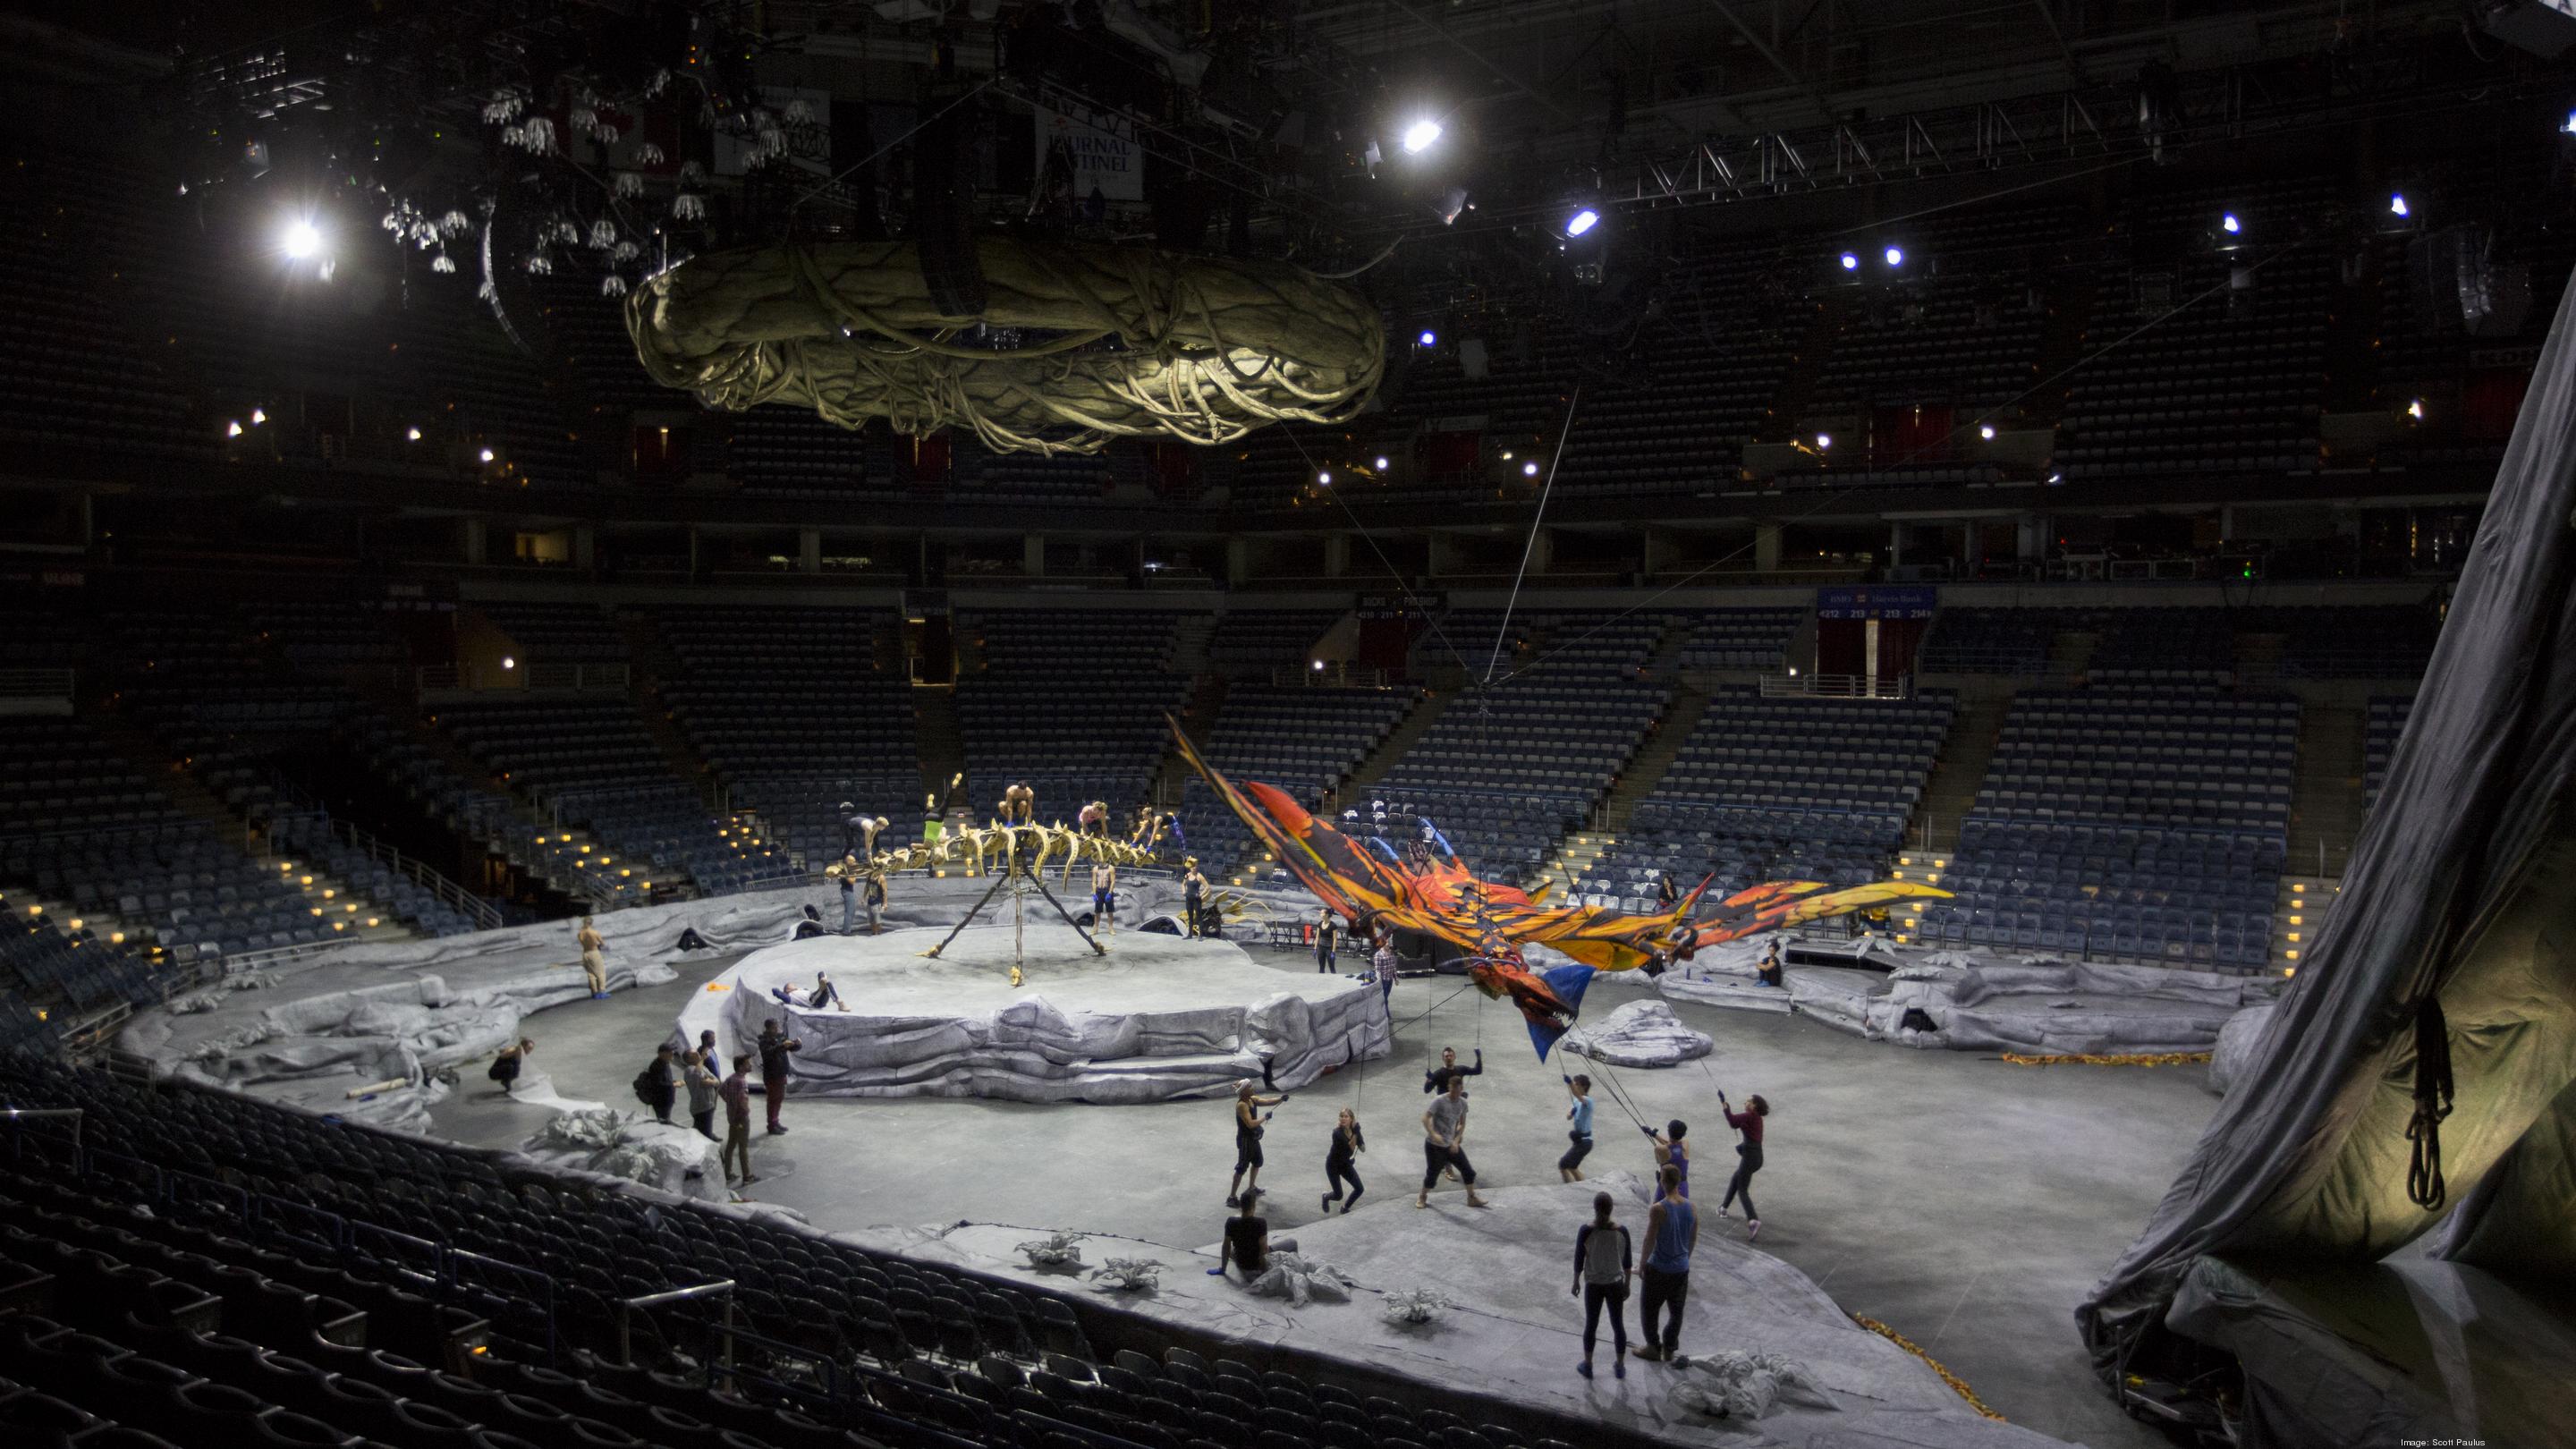 Cirque du Soleil's ice show, 'Crystal,' coming to Milwaukee's Fiserv Forum